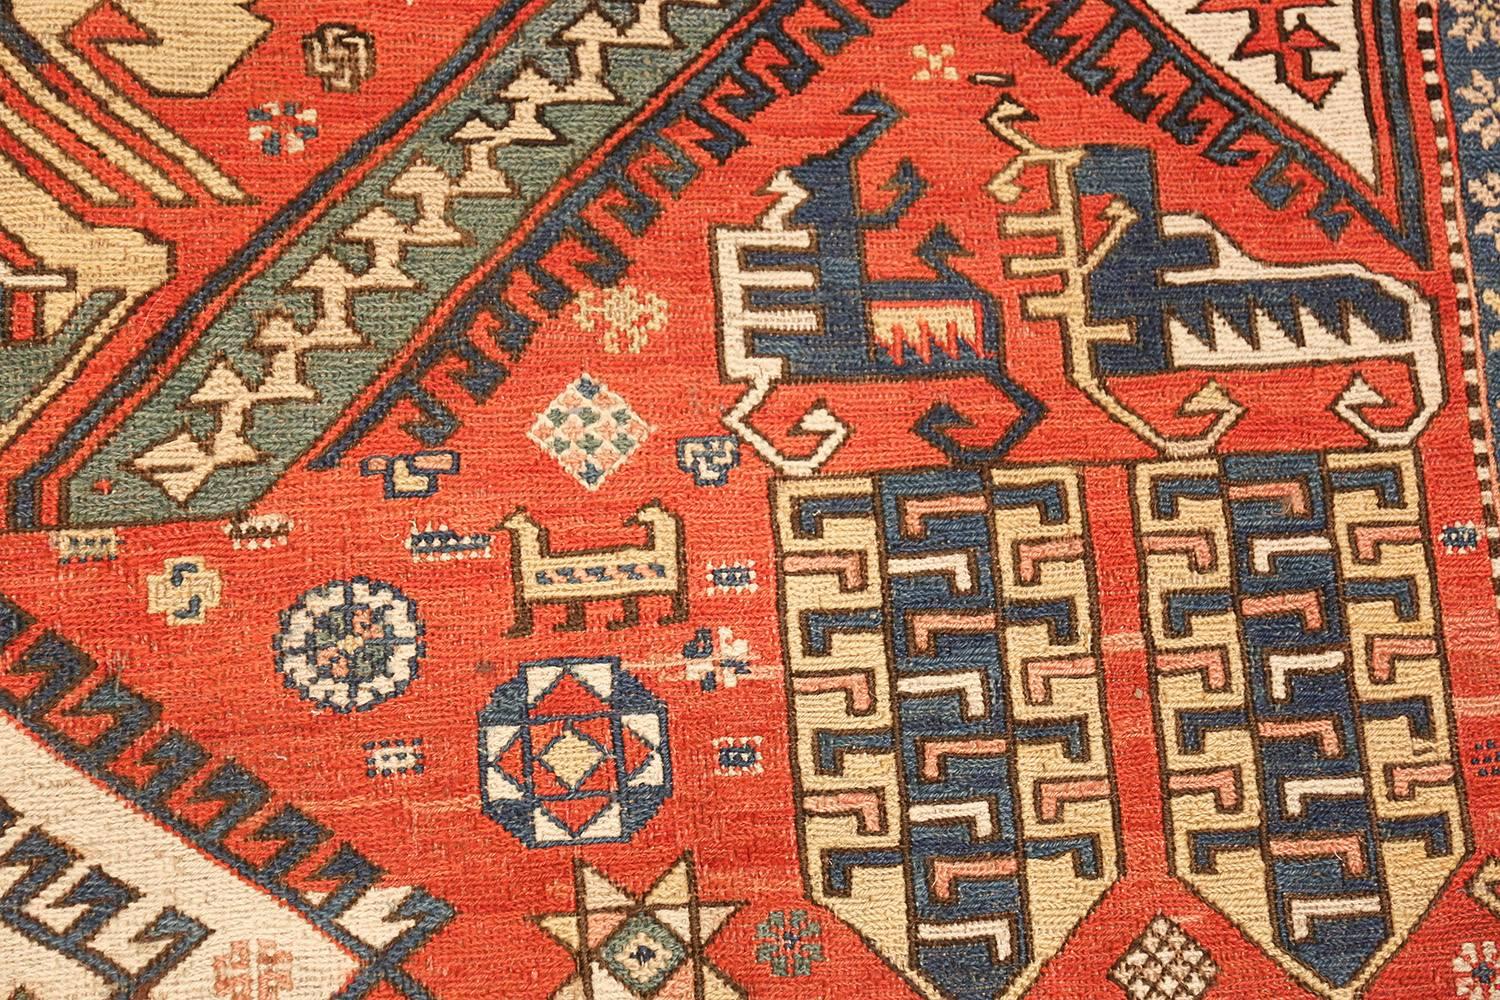 Wool Antique Red Background Soumak Caucasian Rug. Size: 5 ft 9 in x 10 ft 2 in 